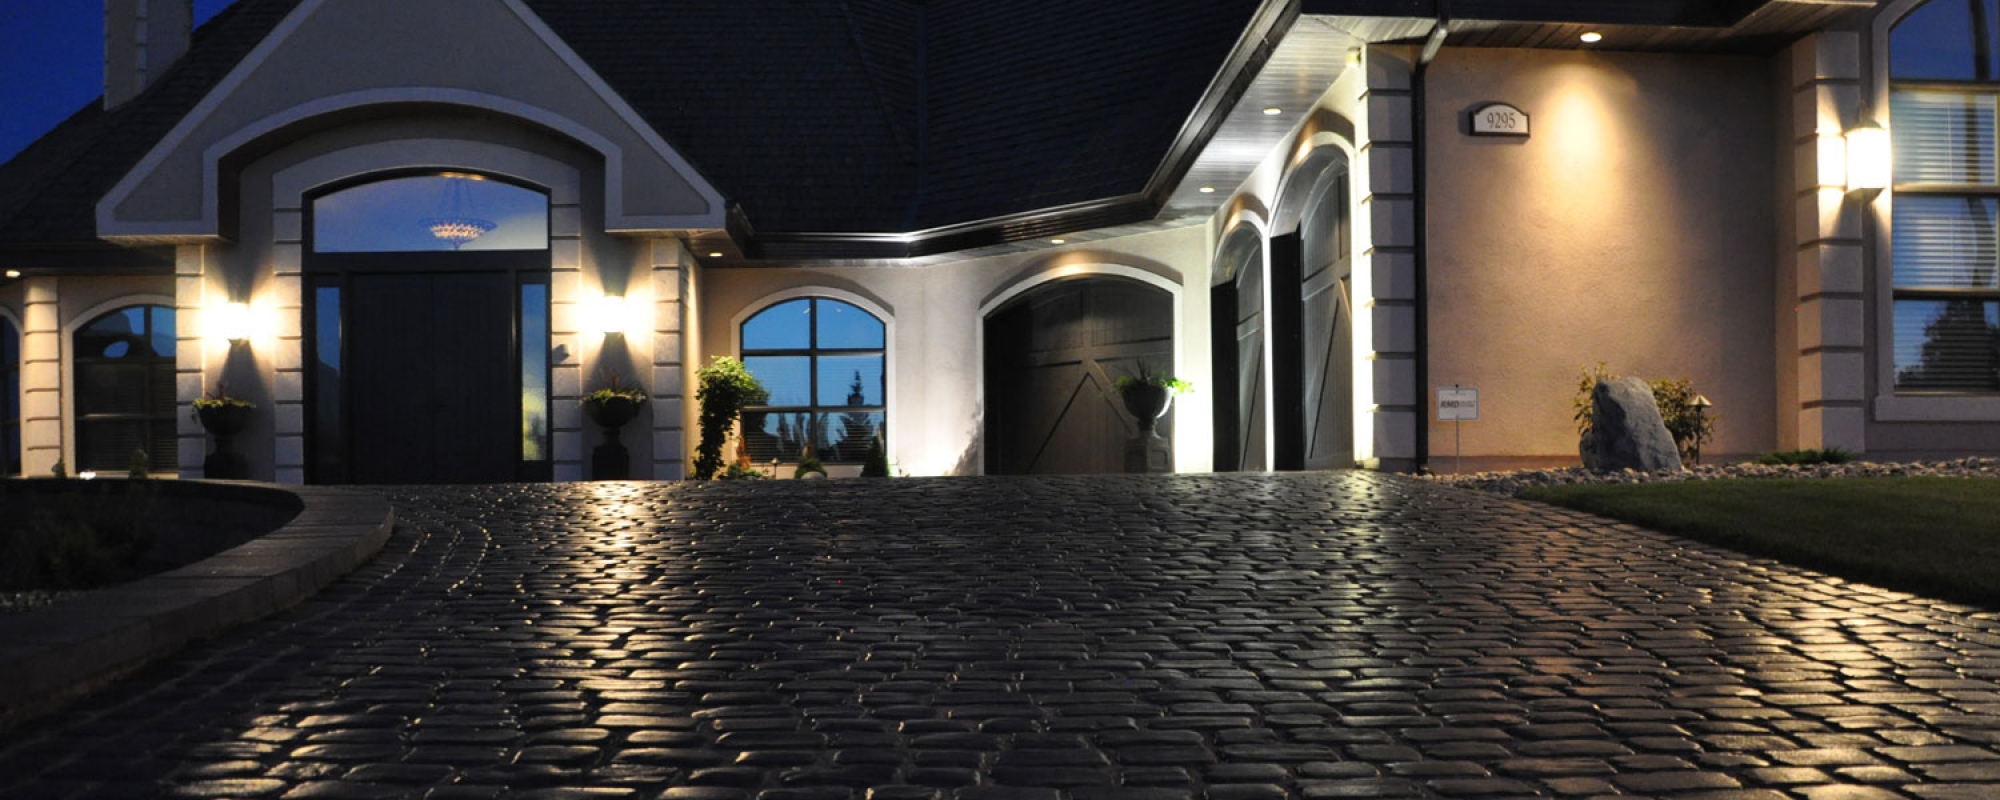 The Amazing Look <br>of Paving Stones